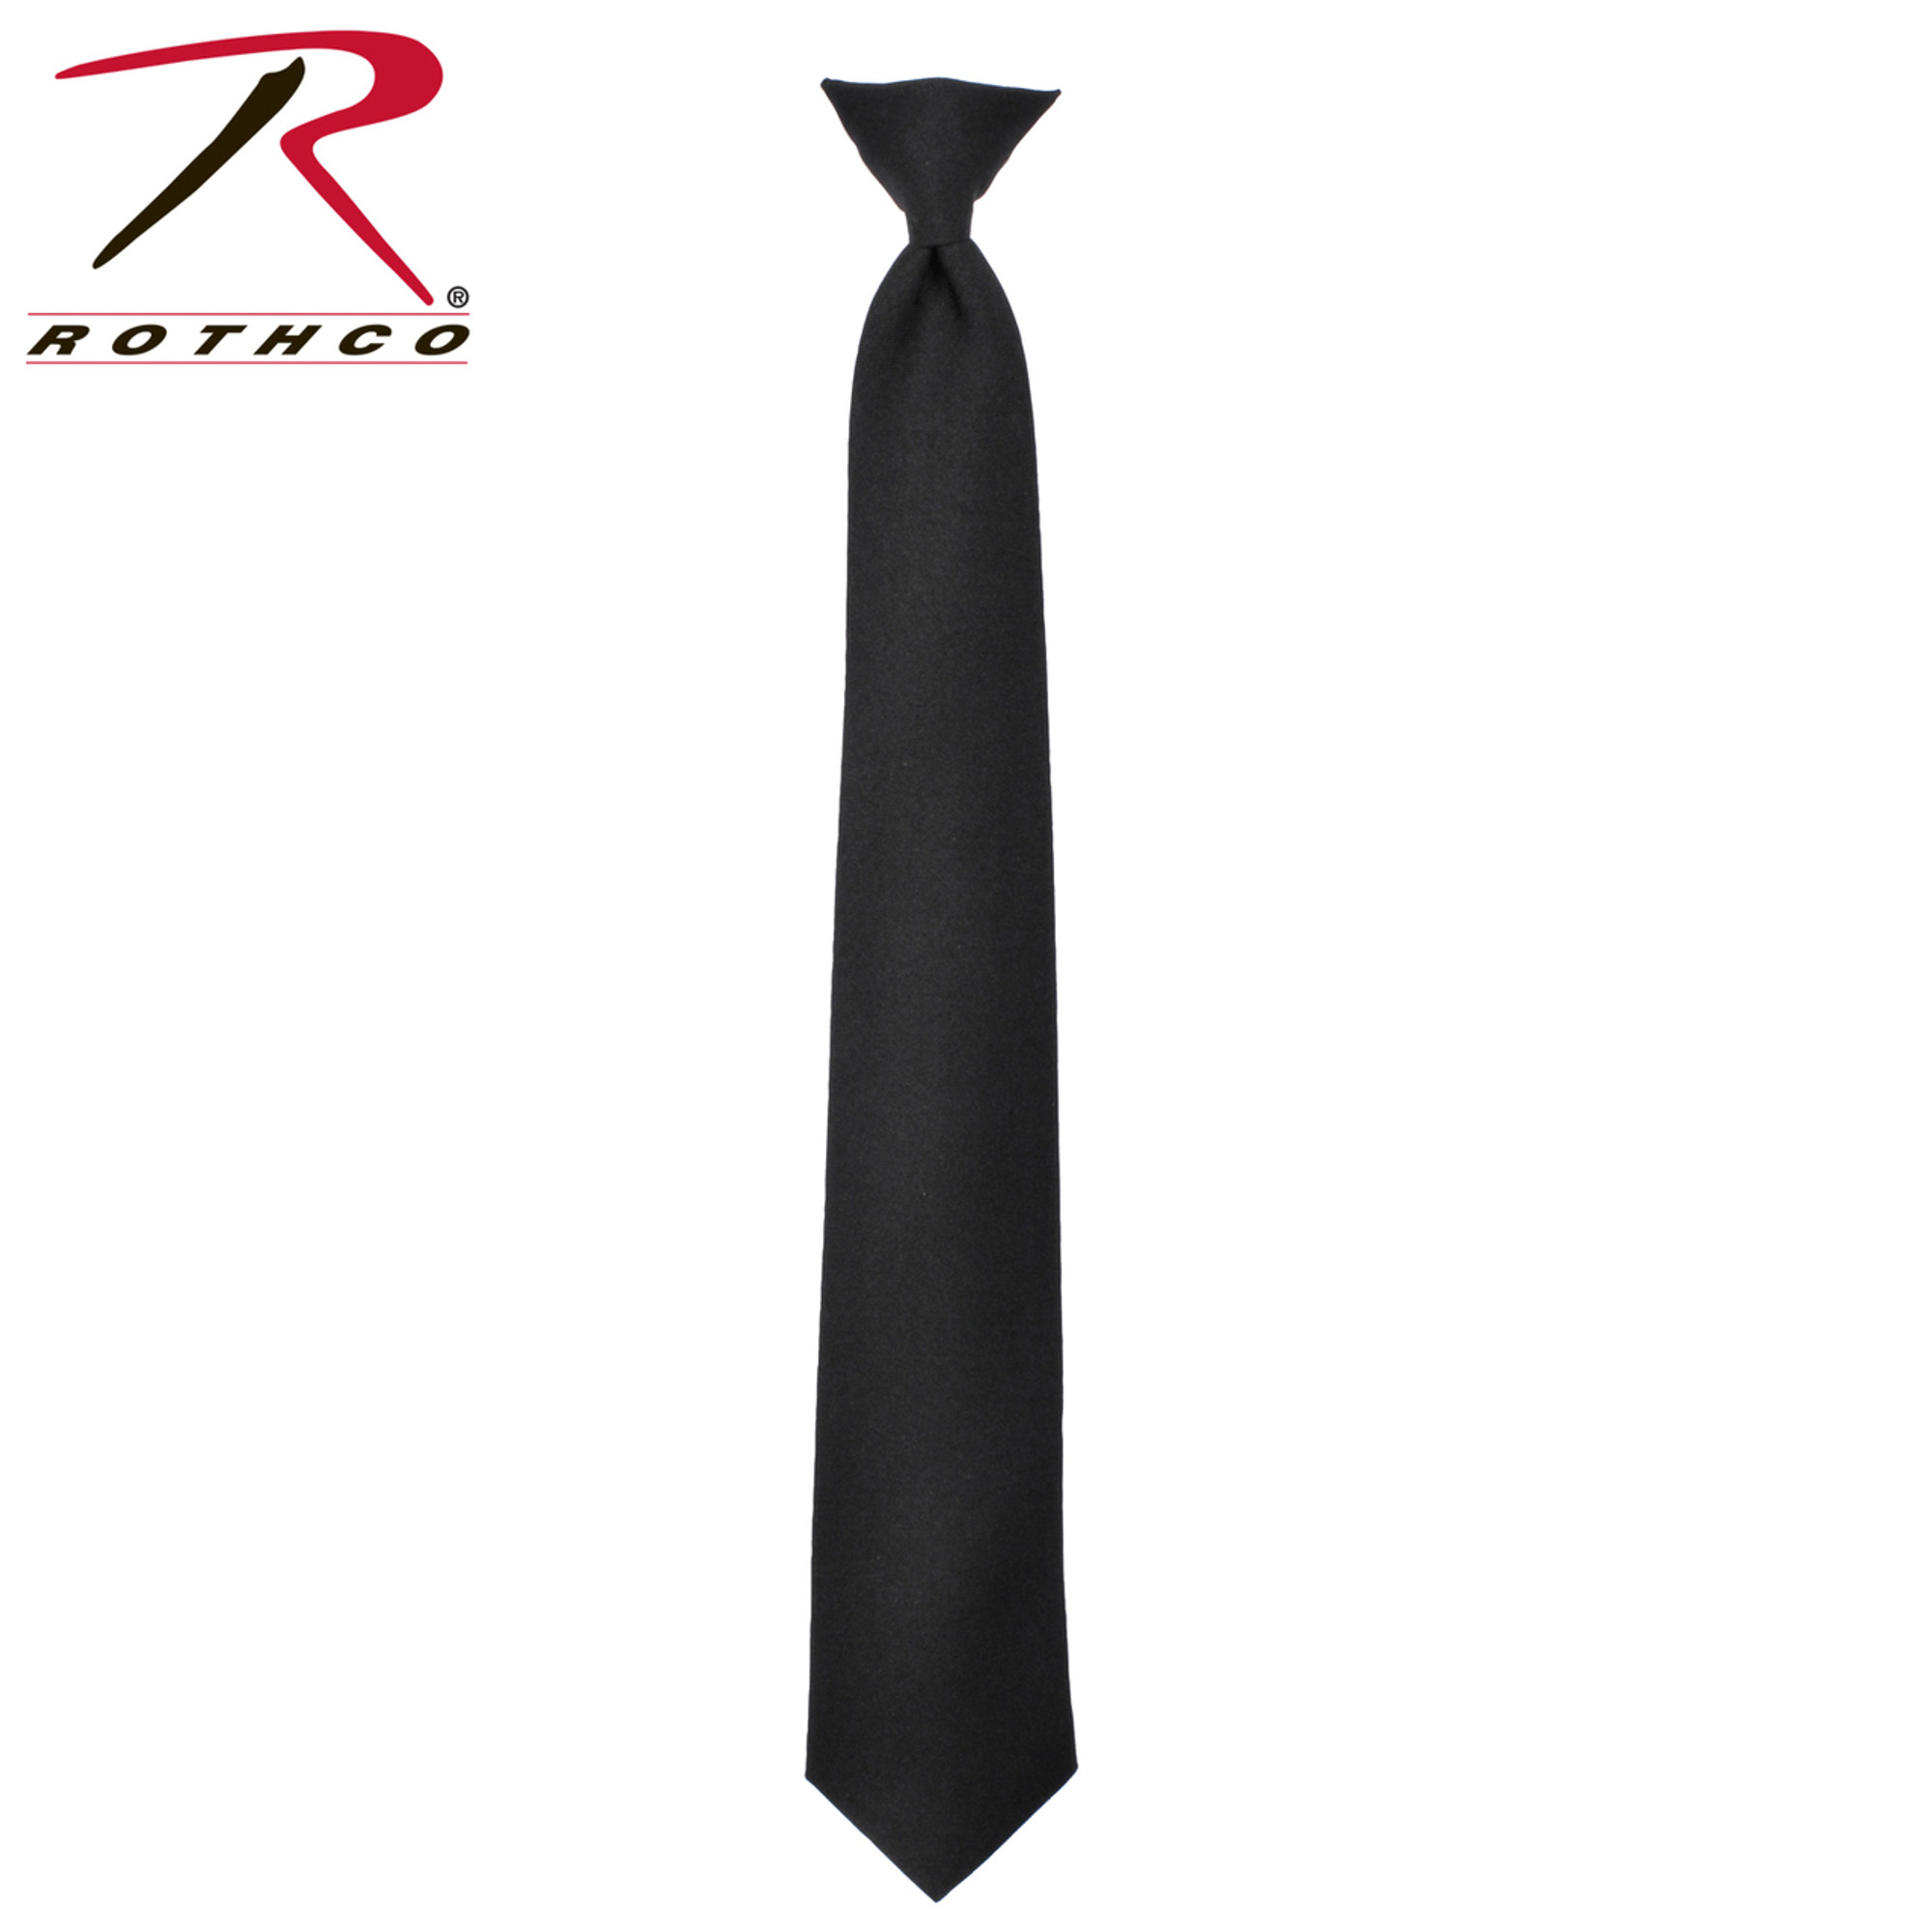 Rothco Police Issue Clip-On Neckties - Black